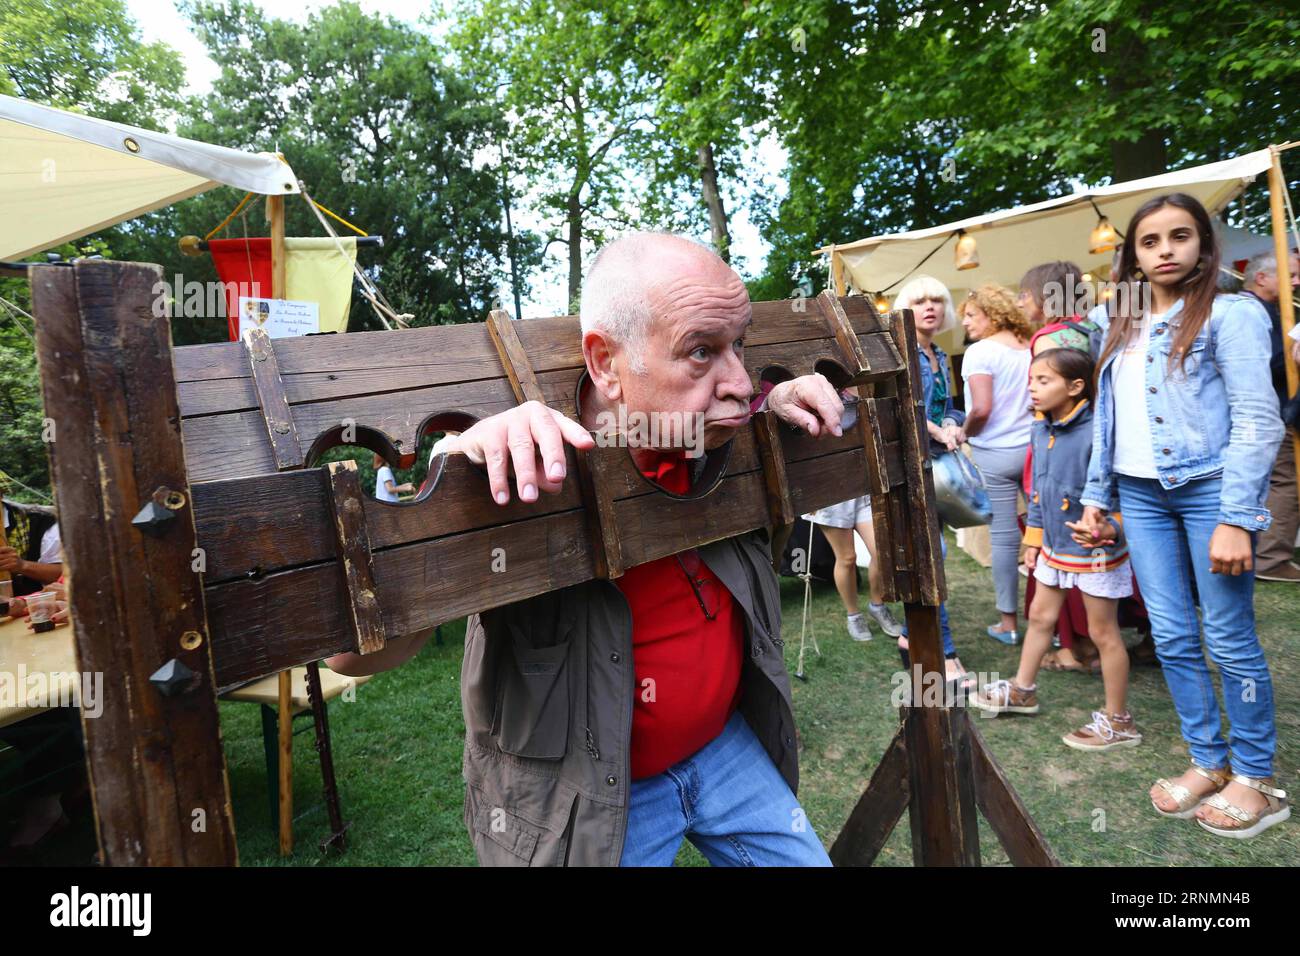 (170605) -- BRUSSELS, June 5, 2017 -- A man tries a medieval instrument of torture during a medieval festival in Brussels, Belgium, June 4, 2017. ) (zjy) BELGIUM-BRUSSELS-MEDIEVAL FESTIVAL GongxBing PUBLICATIONxNOTxINxCHN   Brussels June 5 2017 a Man tries a Medieval Instrument of TORTURE during a Medieval Festival in Brussels Belgium June 4 2017 zjy Belgium Brussels Medieval Festival GongxBing PUBLICATIONxNOTxINxCHN Stock Photo